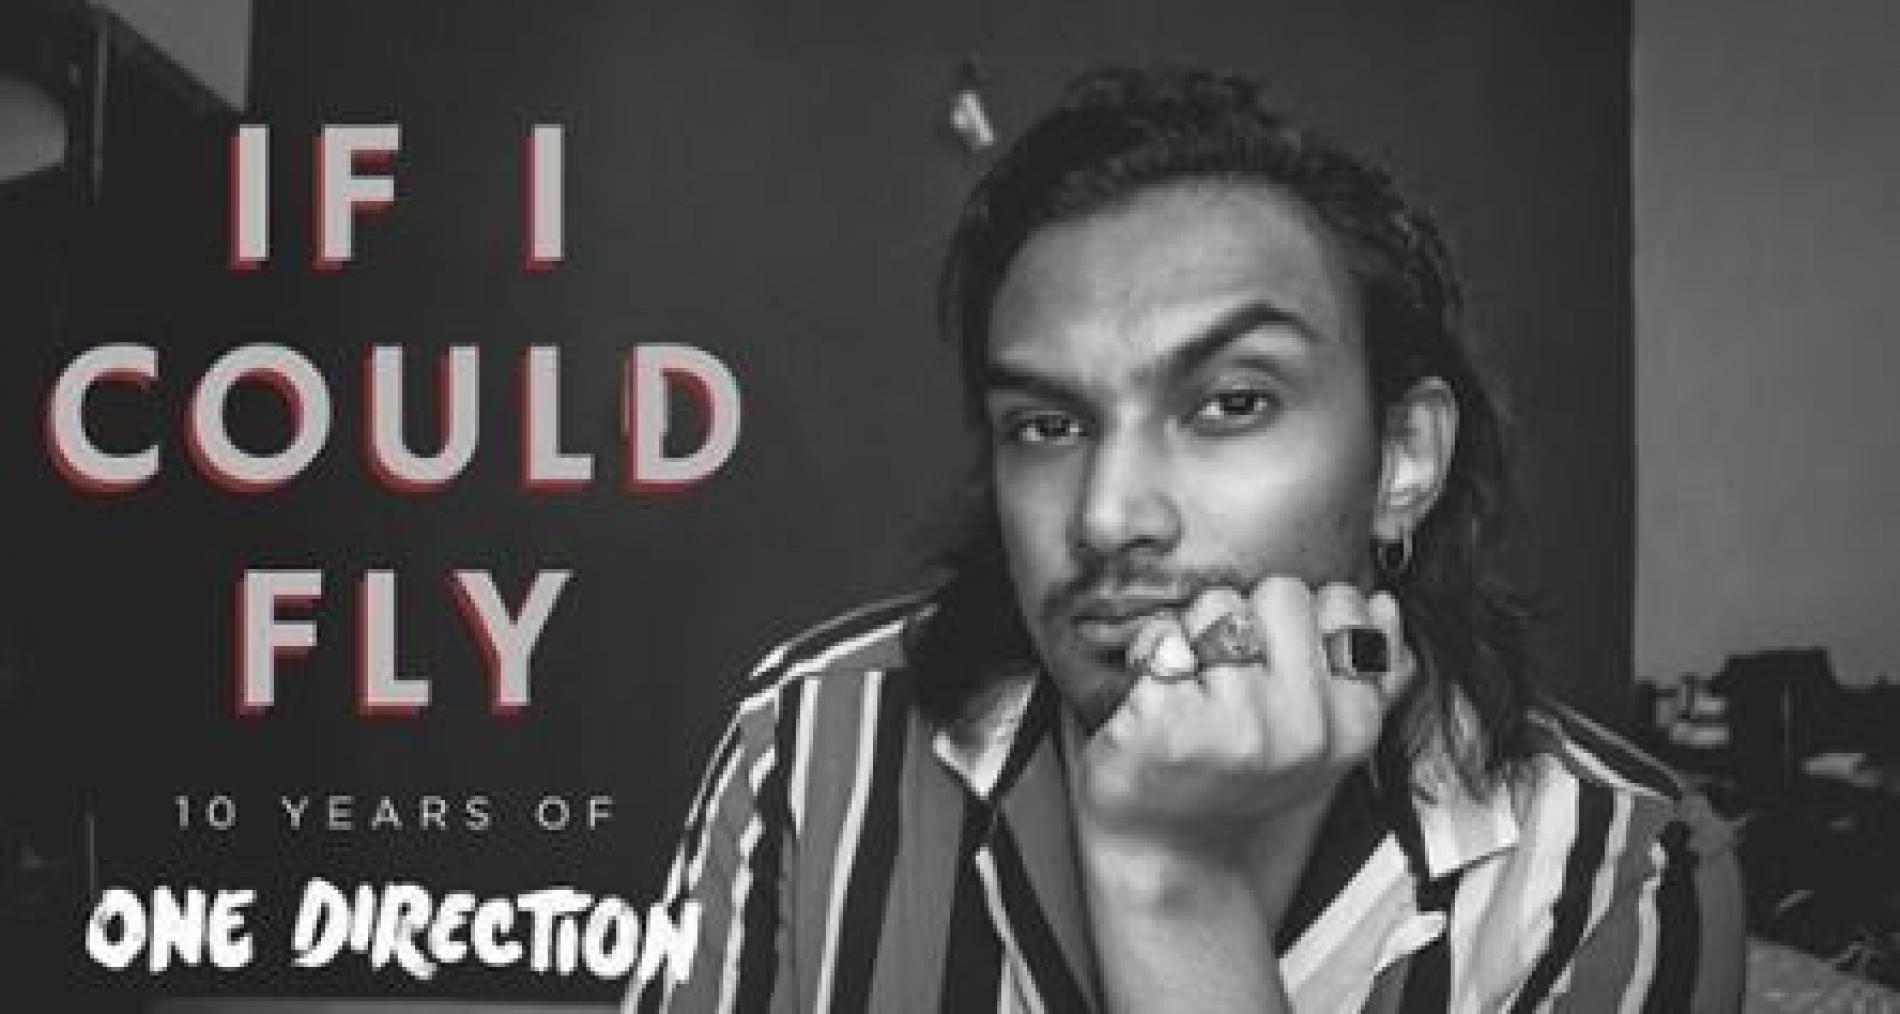 New Music : One Direction – If I Could Fly (10th Anniversary Special | Cover by Ryan de Mel)